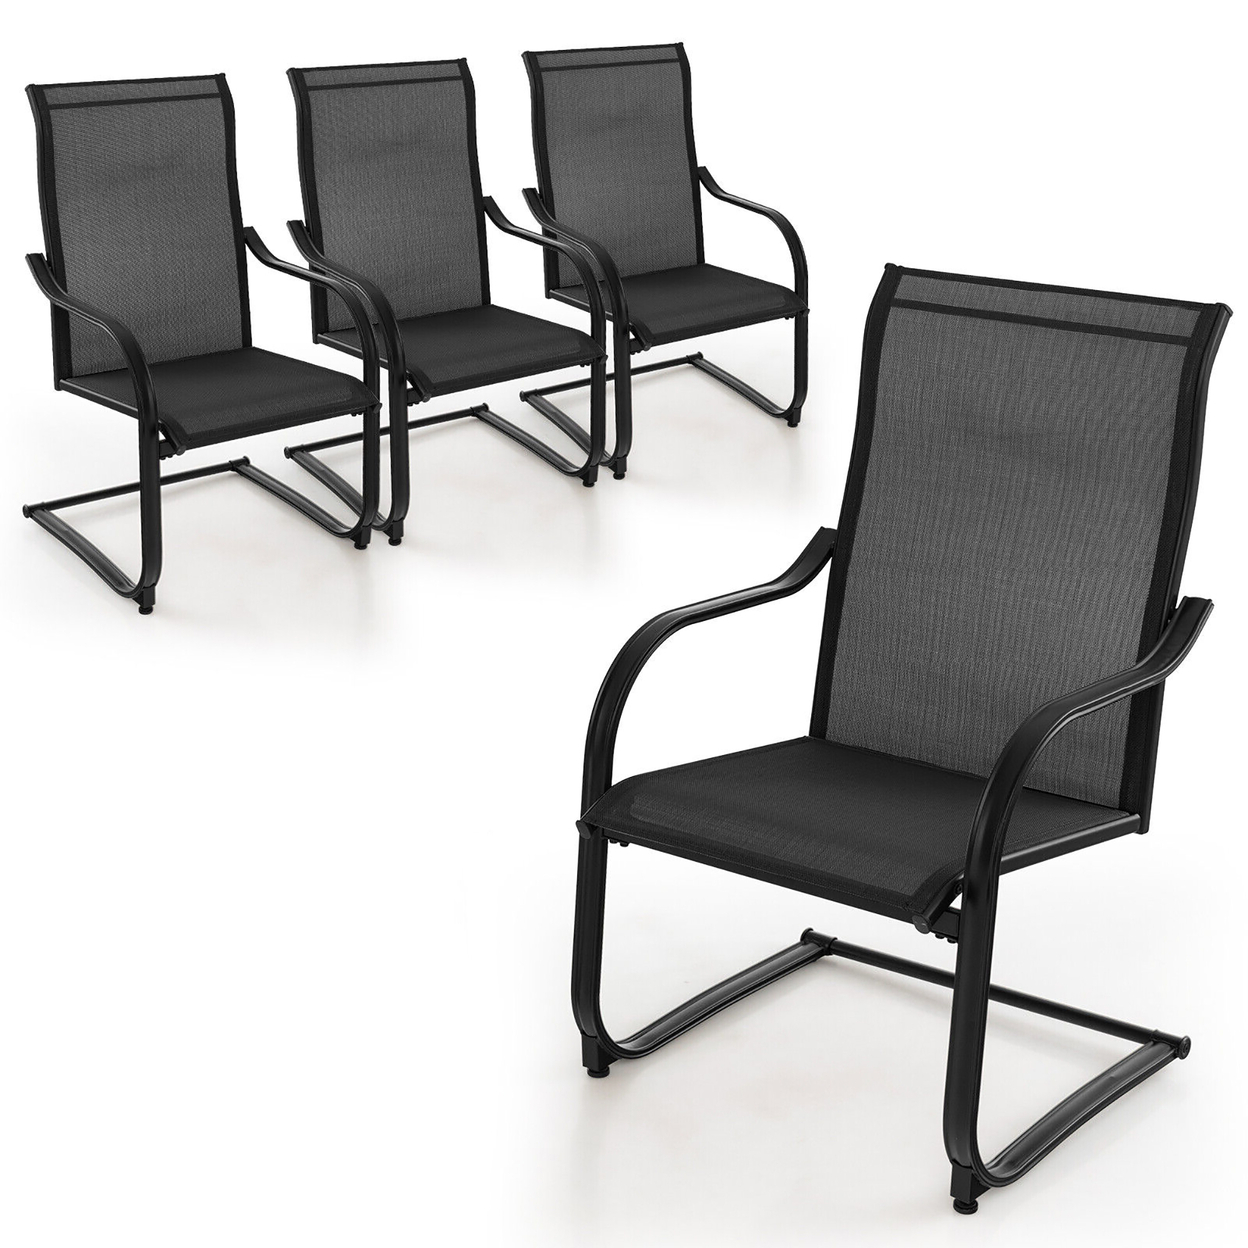 4PCS Outdoor Dining Chairs Patio C-Spring Motion W/ Cozy & Breathable Seat Fabric Black